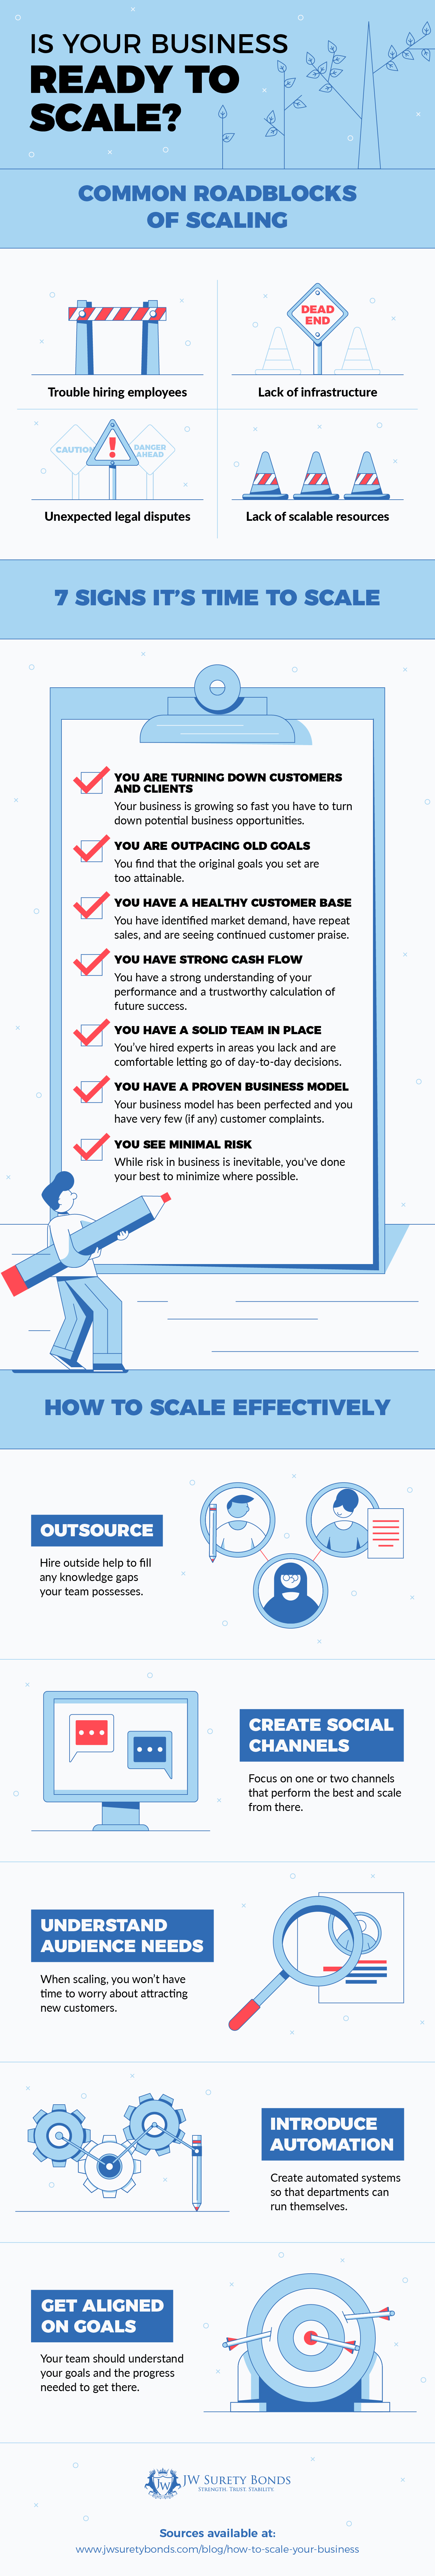 https://www.jwsuretybonds.com/sites/default/files/featured_images/JW-Scaling-Your-Business-Inforgraphic.png